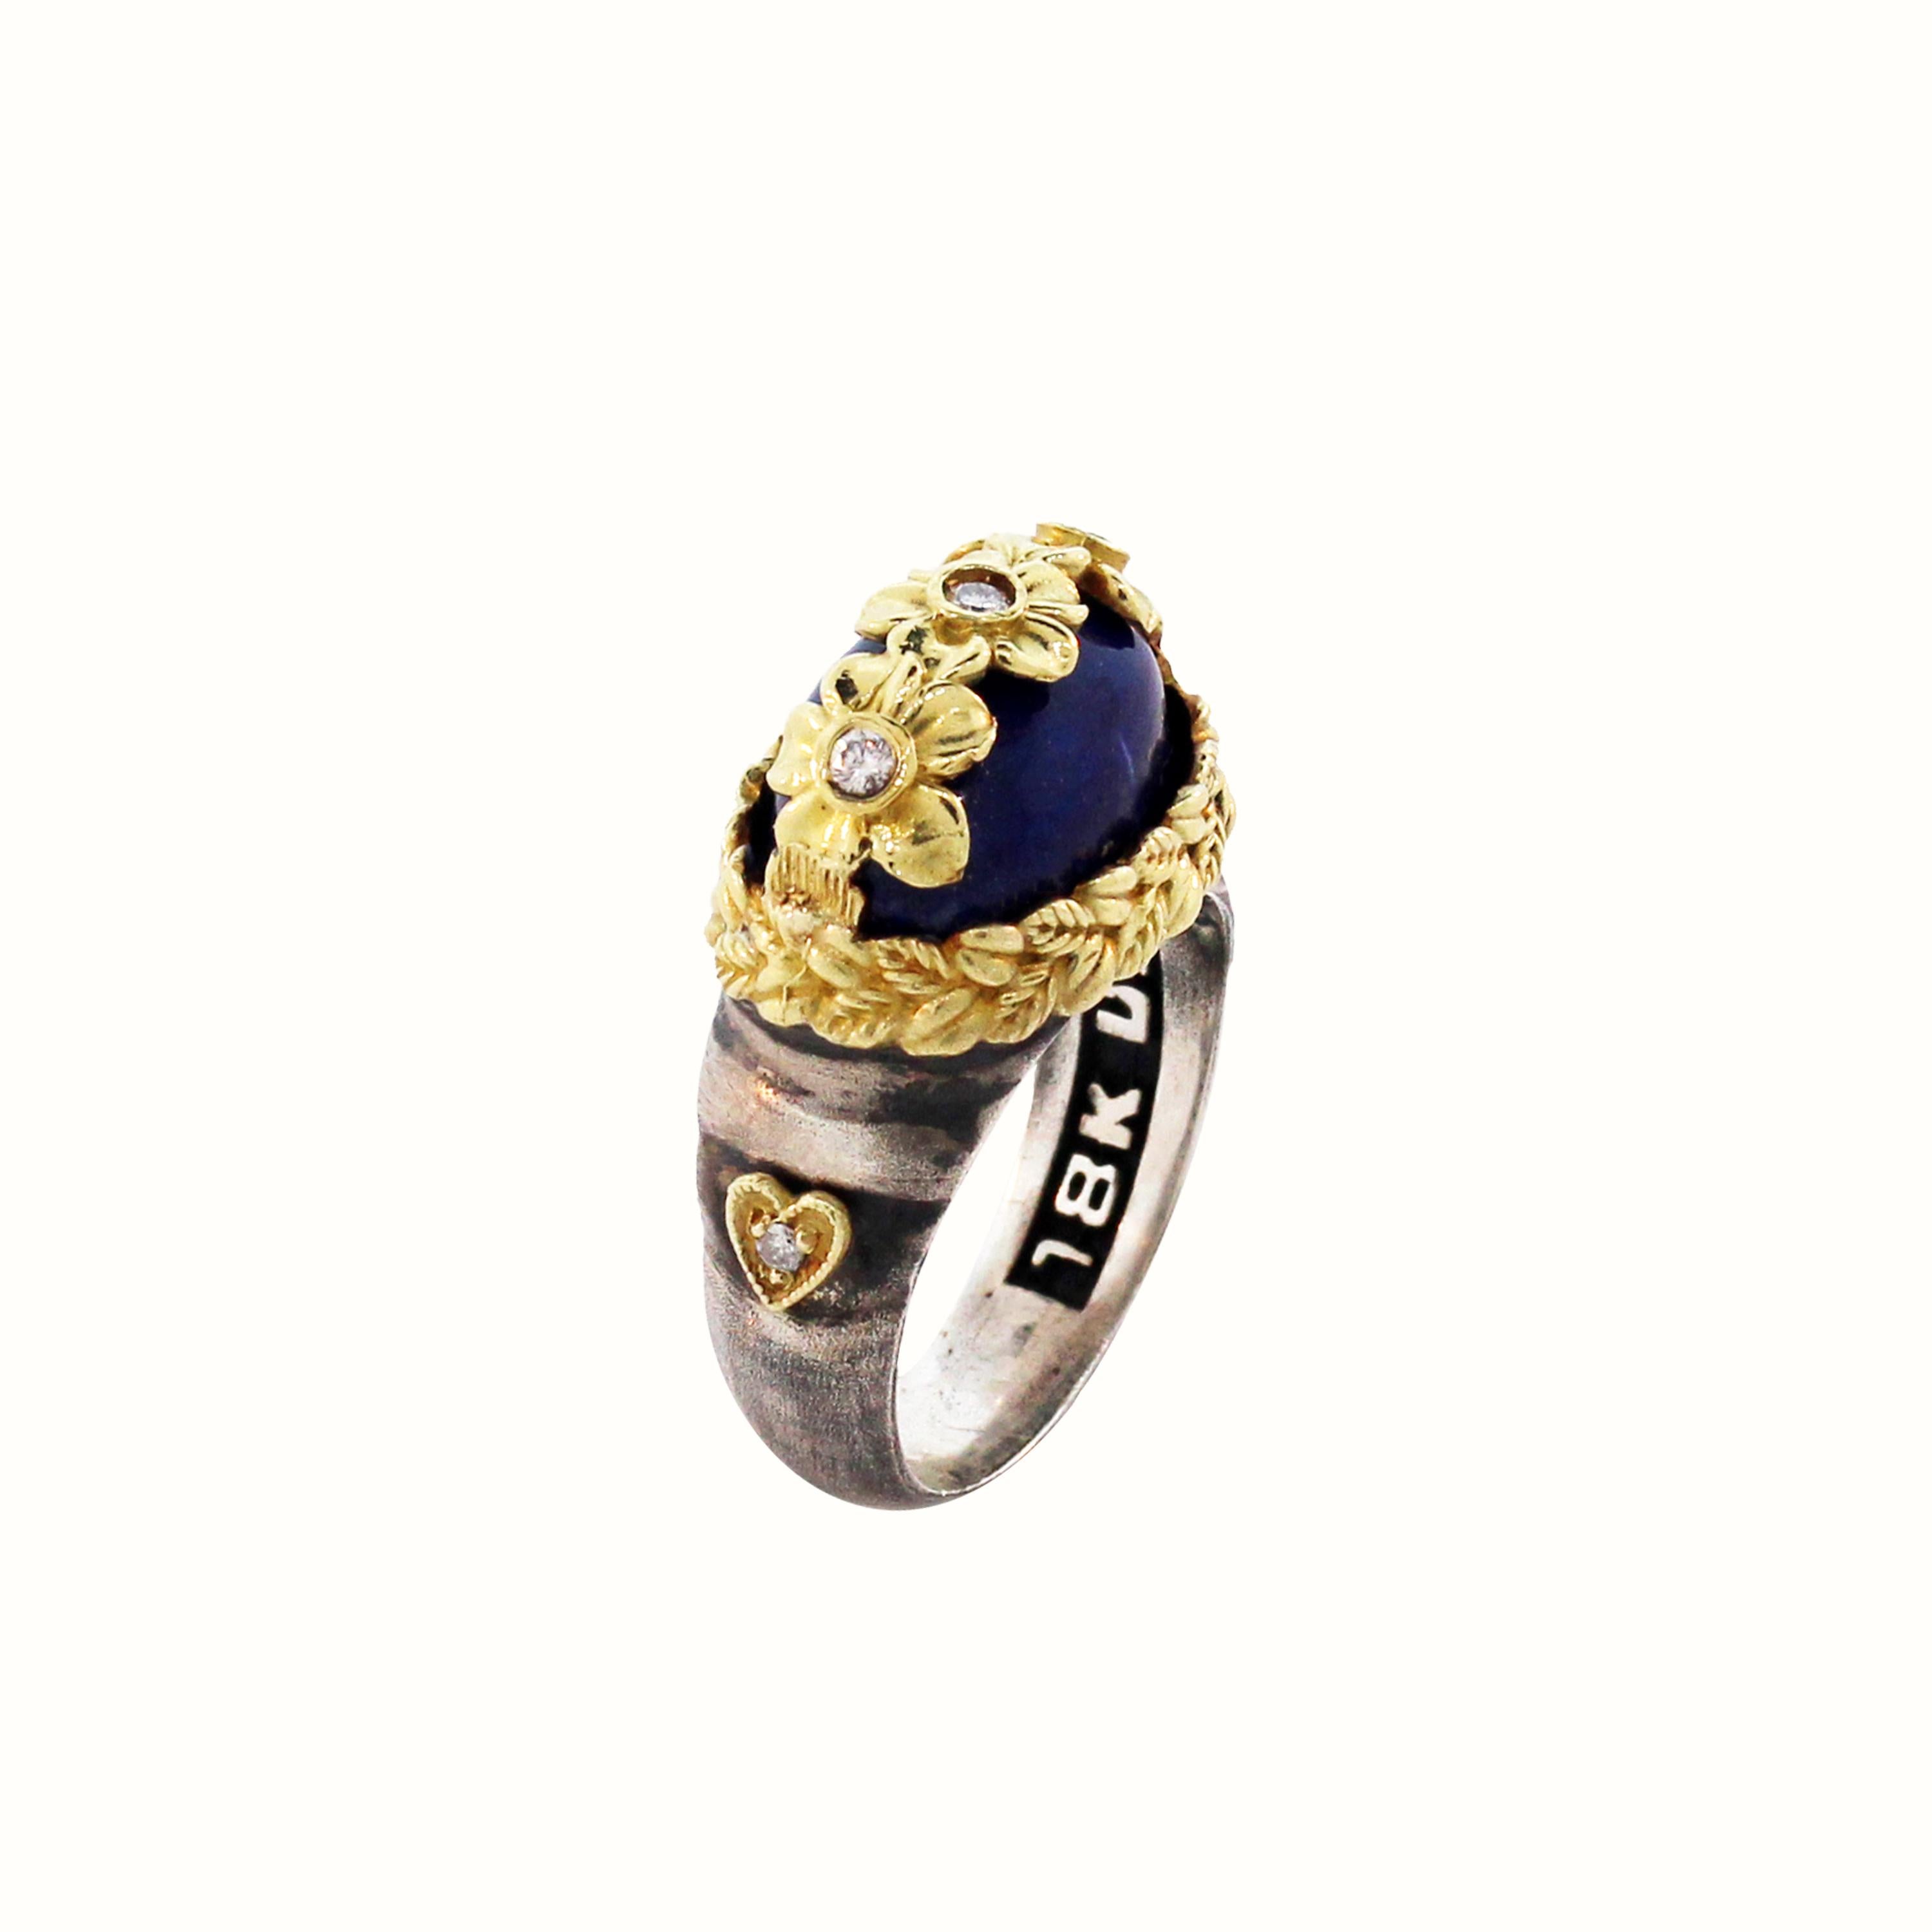 Aged Silver & 18K Gold Floral Ring with Diamonds and Lapis Lazuli Center by Stambolian

Center is oval Lapis Lazuli with floral diamond design work set right above

0.11 carat diamonds

Lapis Lazuli is apprx. 8 carat

Ring face is 0.7 inch x 0.4